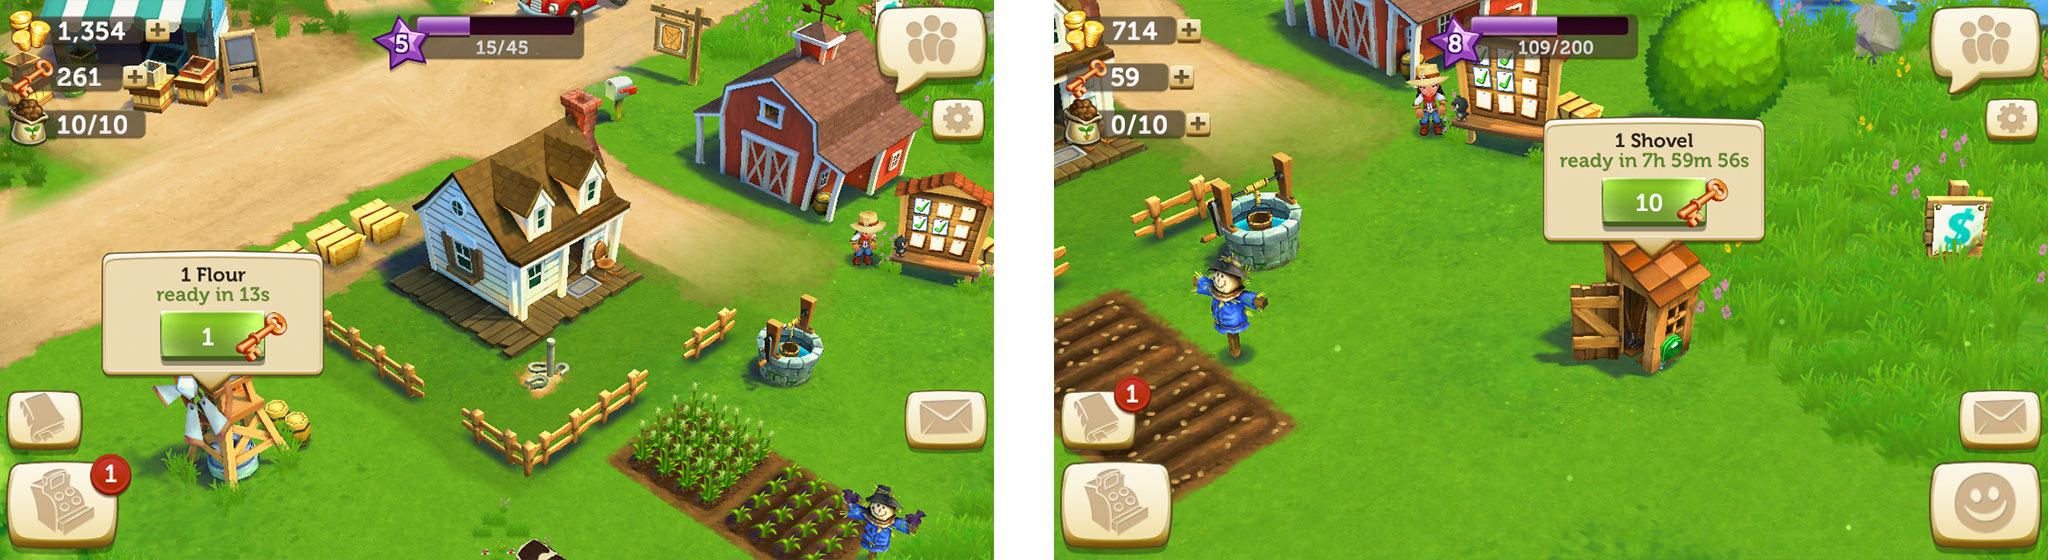 how to make money fast in farmville